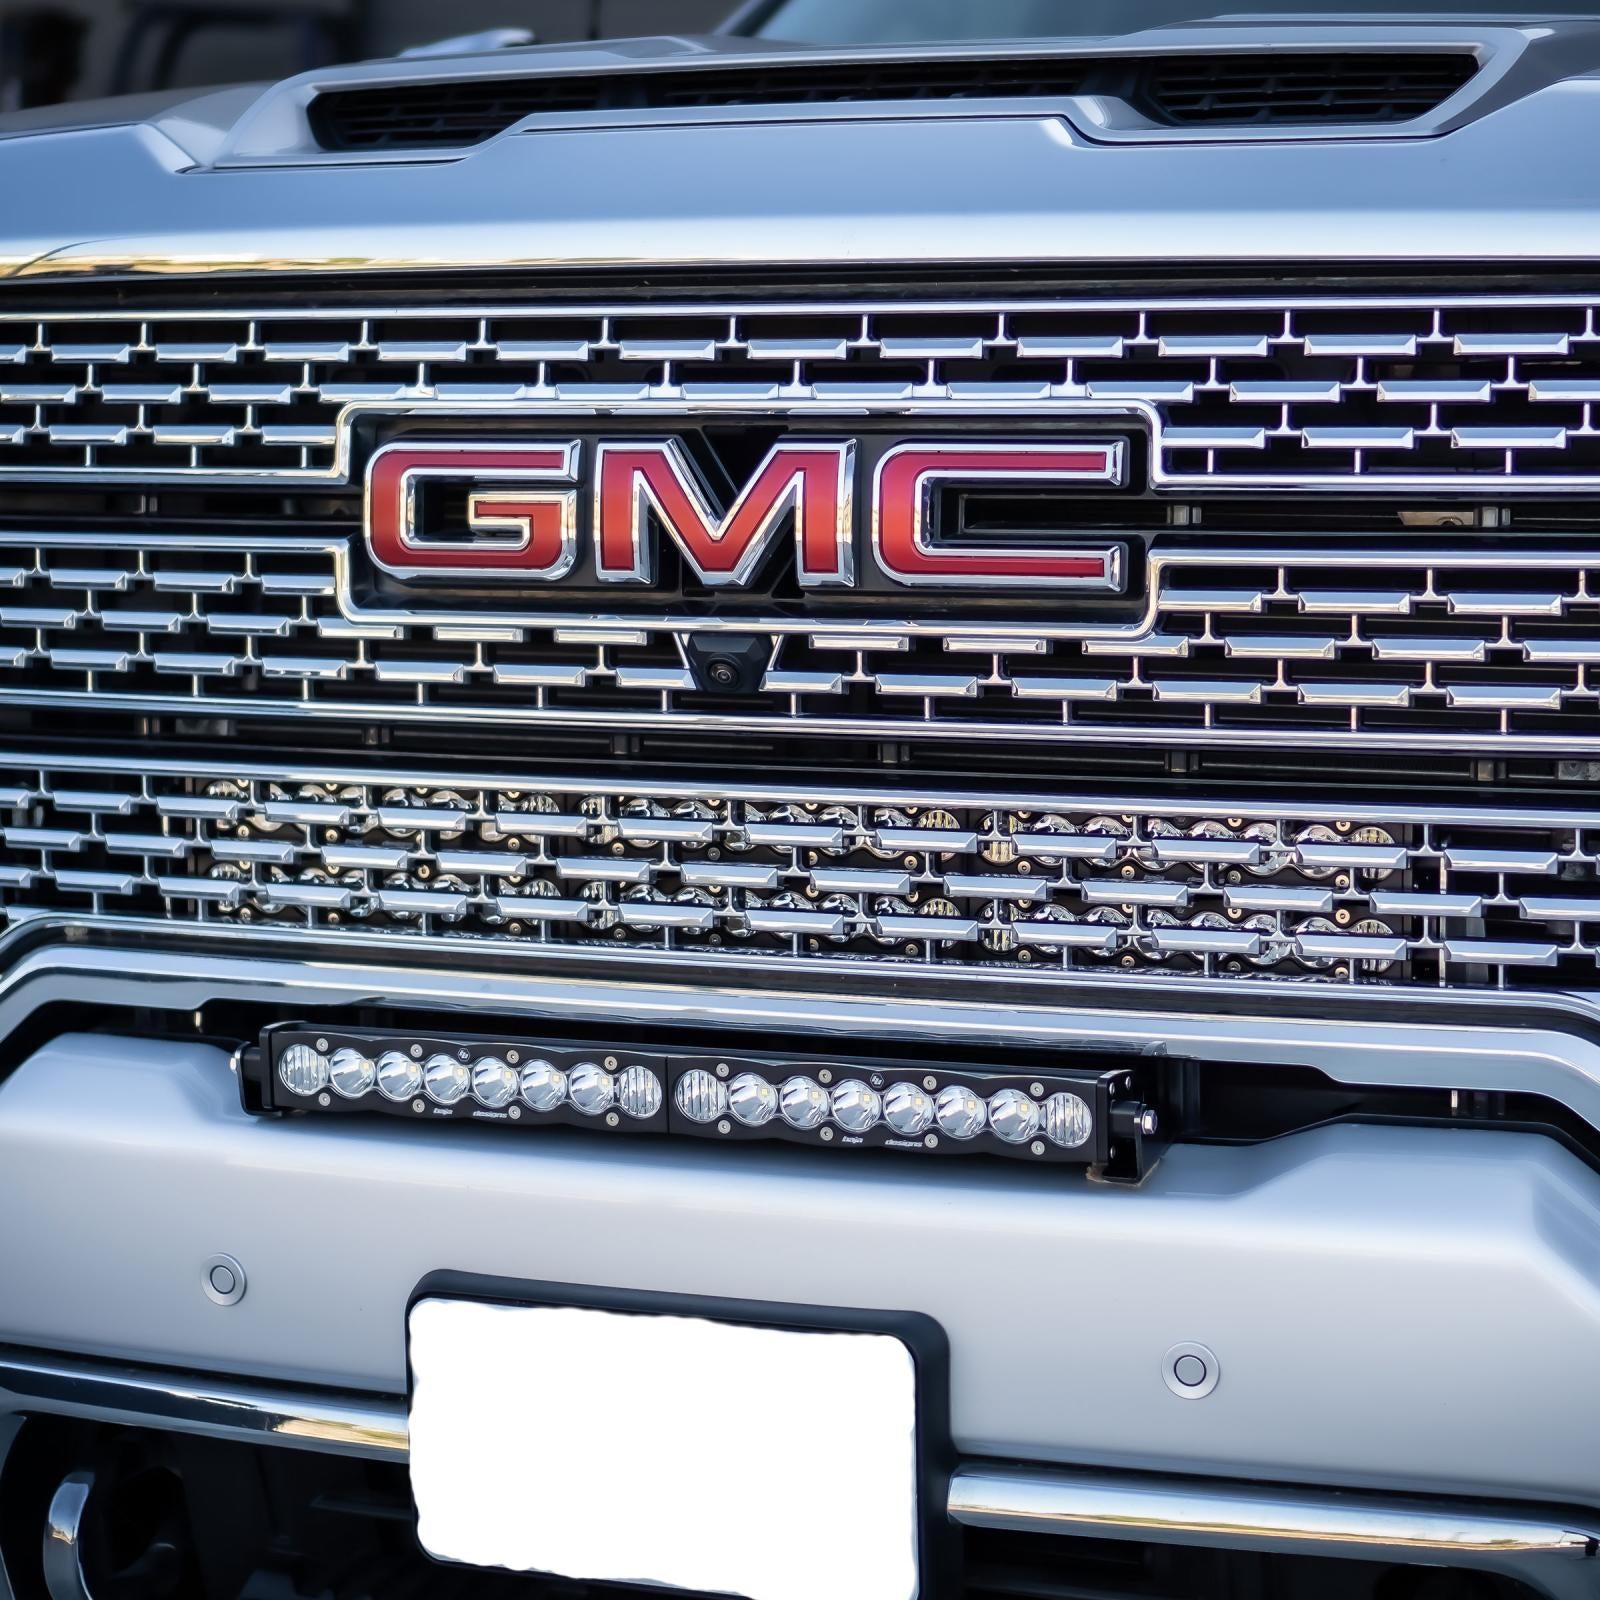 '20-22 Chevy/GMC 2500/3500 Baja Designs 30" S8 Behind the Grille LED Light Bar Kit display